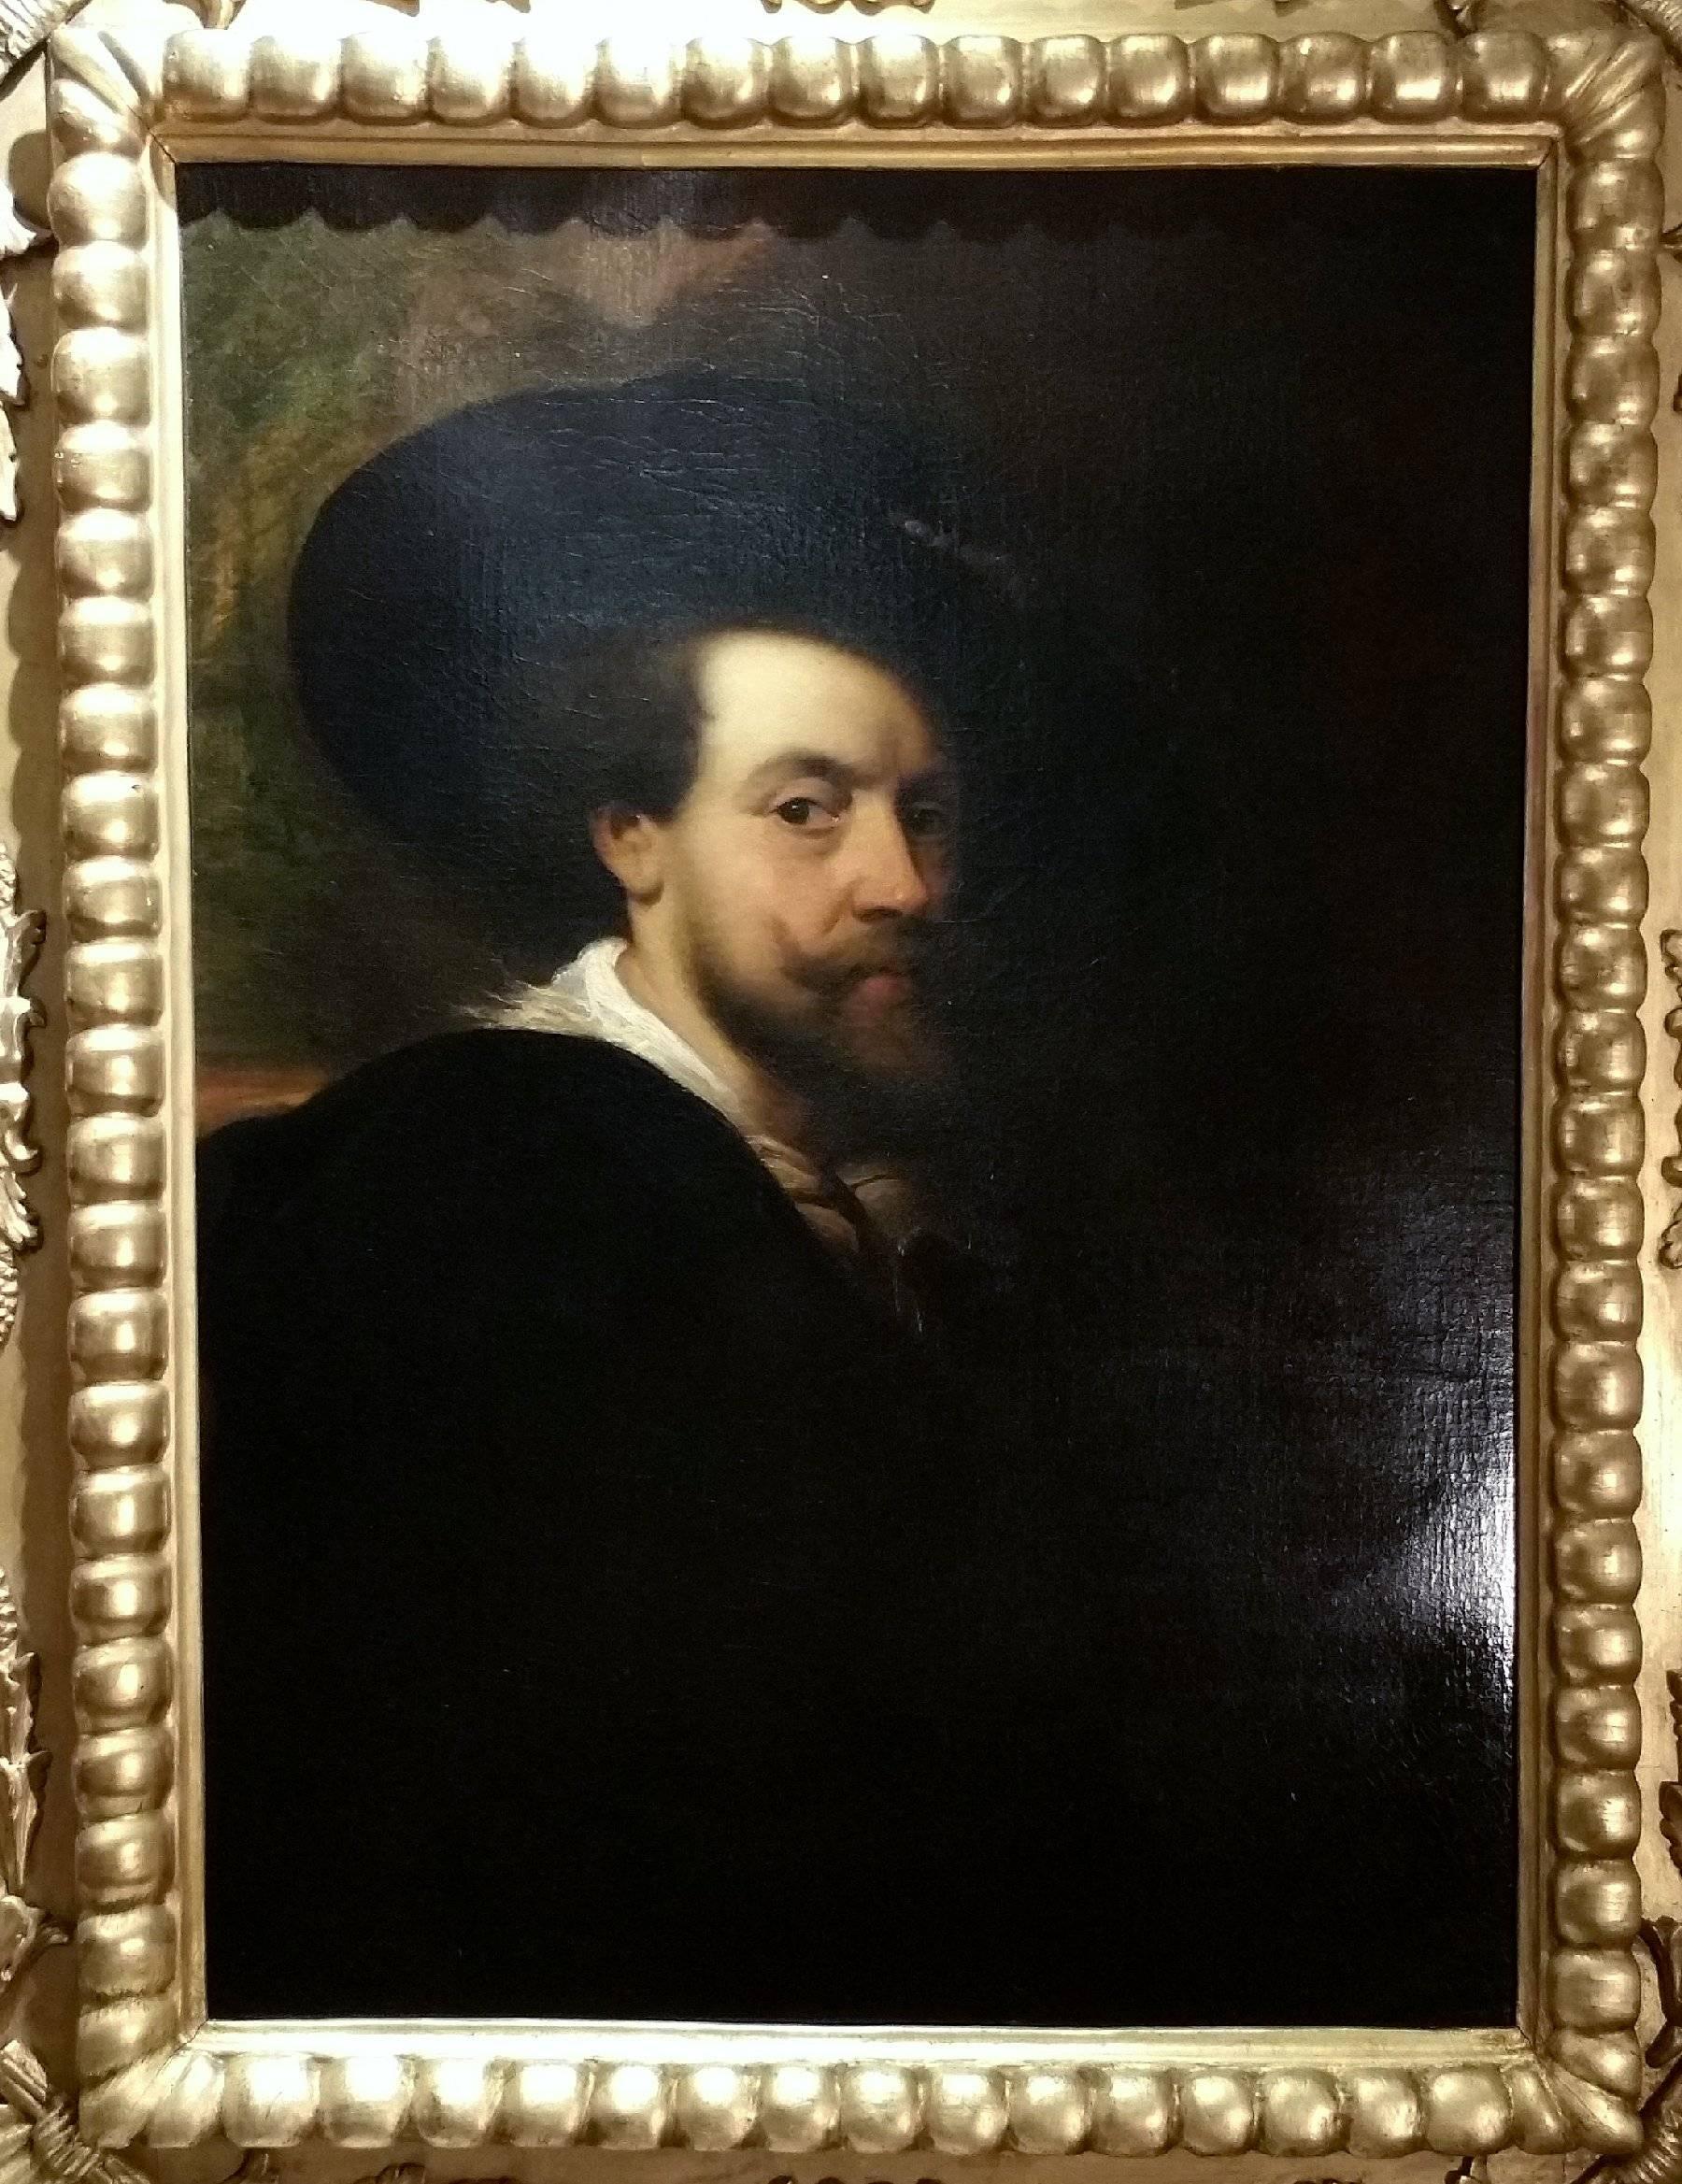 This superb mid-18th century oil on canvas depicts a noble gentleman, after Van Dyck. The portrait sits in an ornate carved giltwood frame, with corner shell designs and a rope border around the inside border. The painting inclusive of the frame